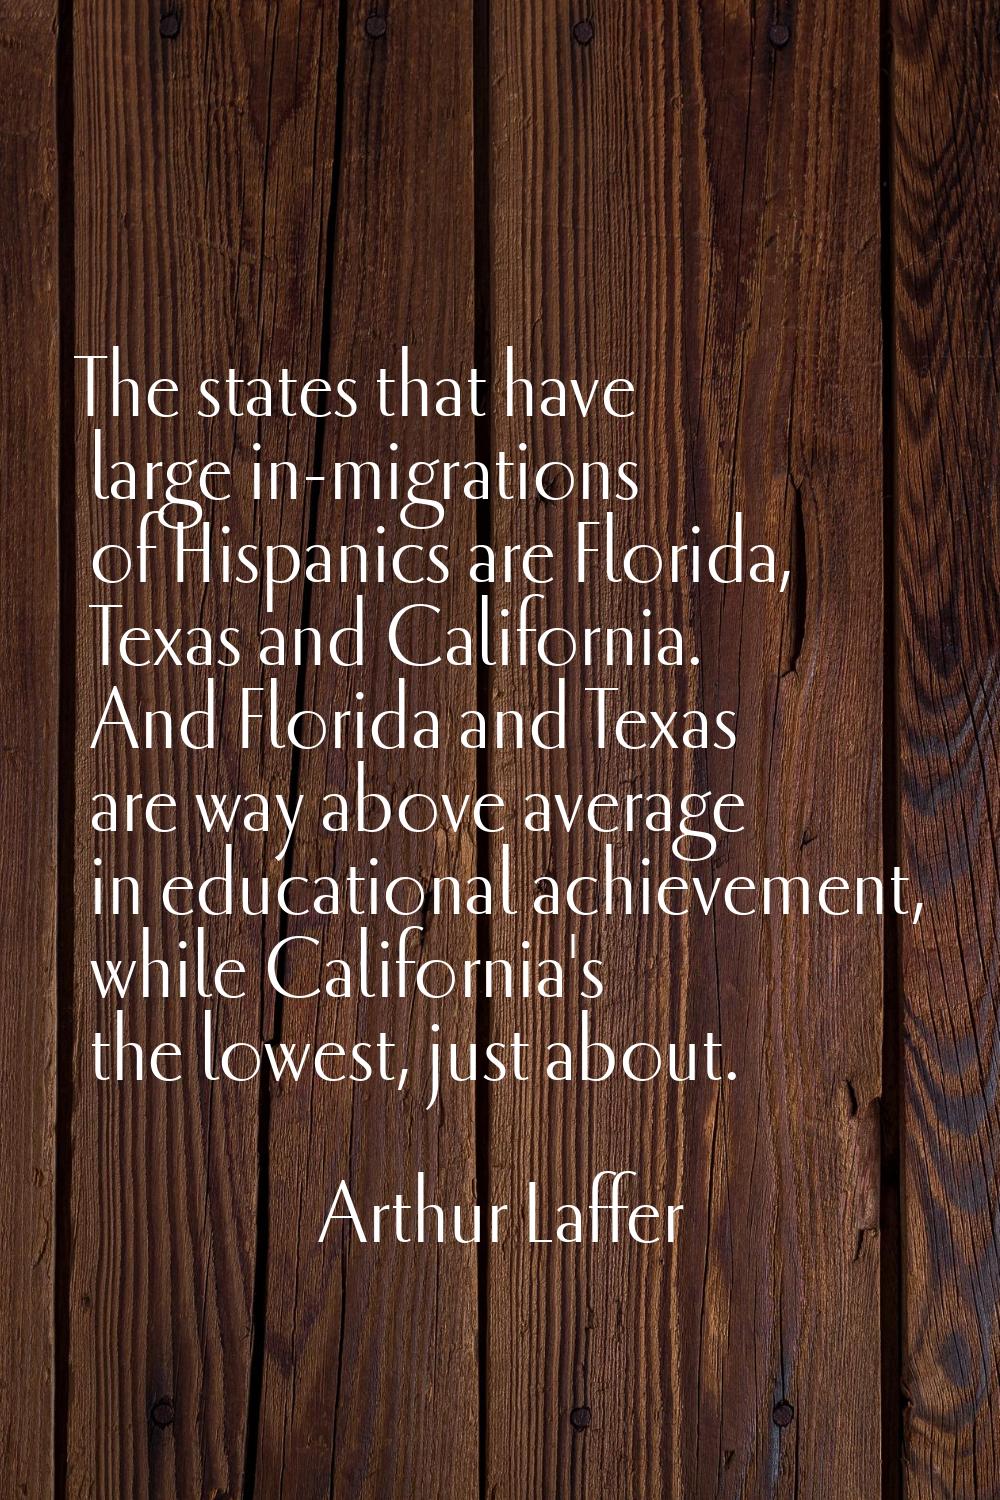 The states that have large in-migrations of Hispanics are Florida, Texas and California. And Florid